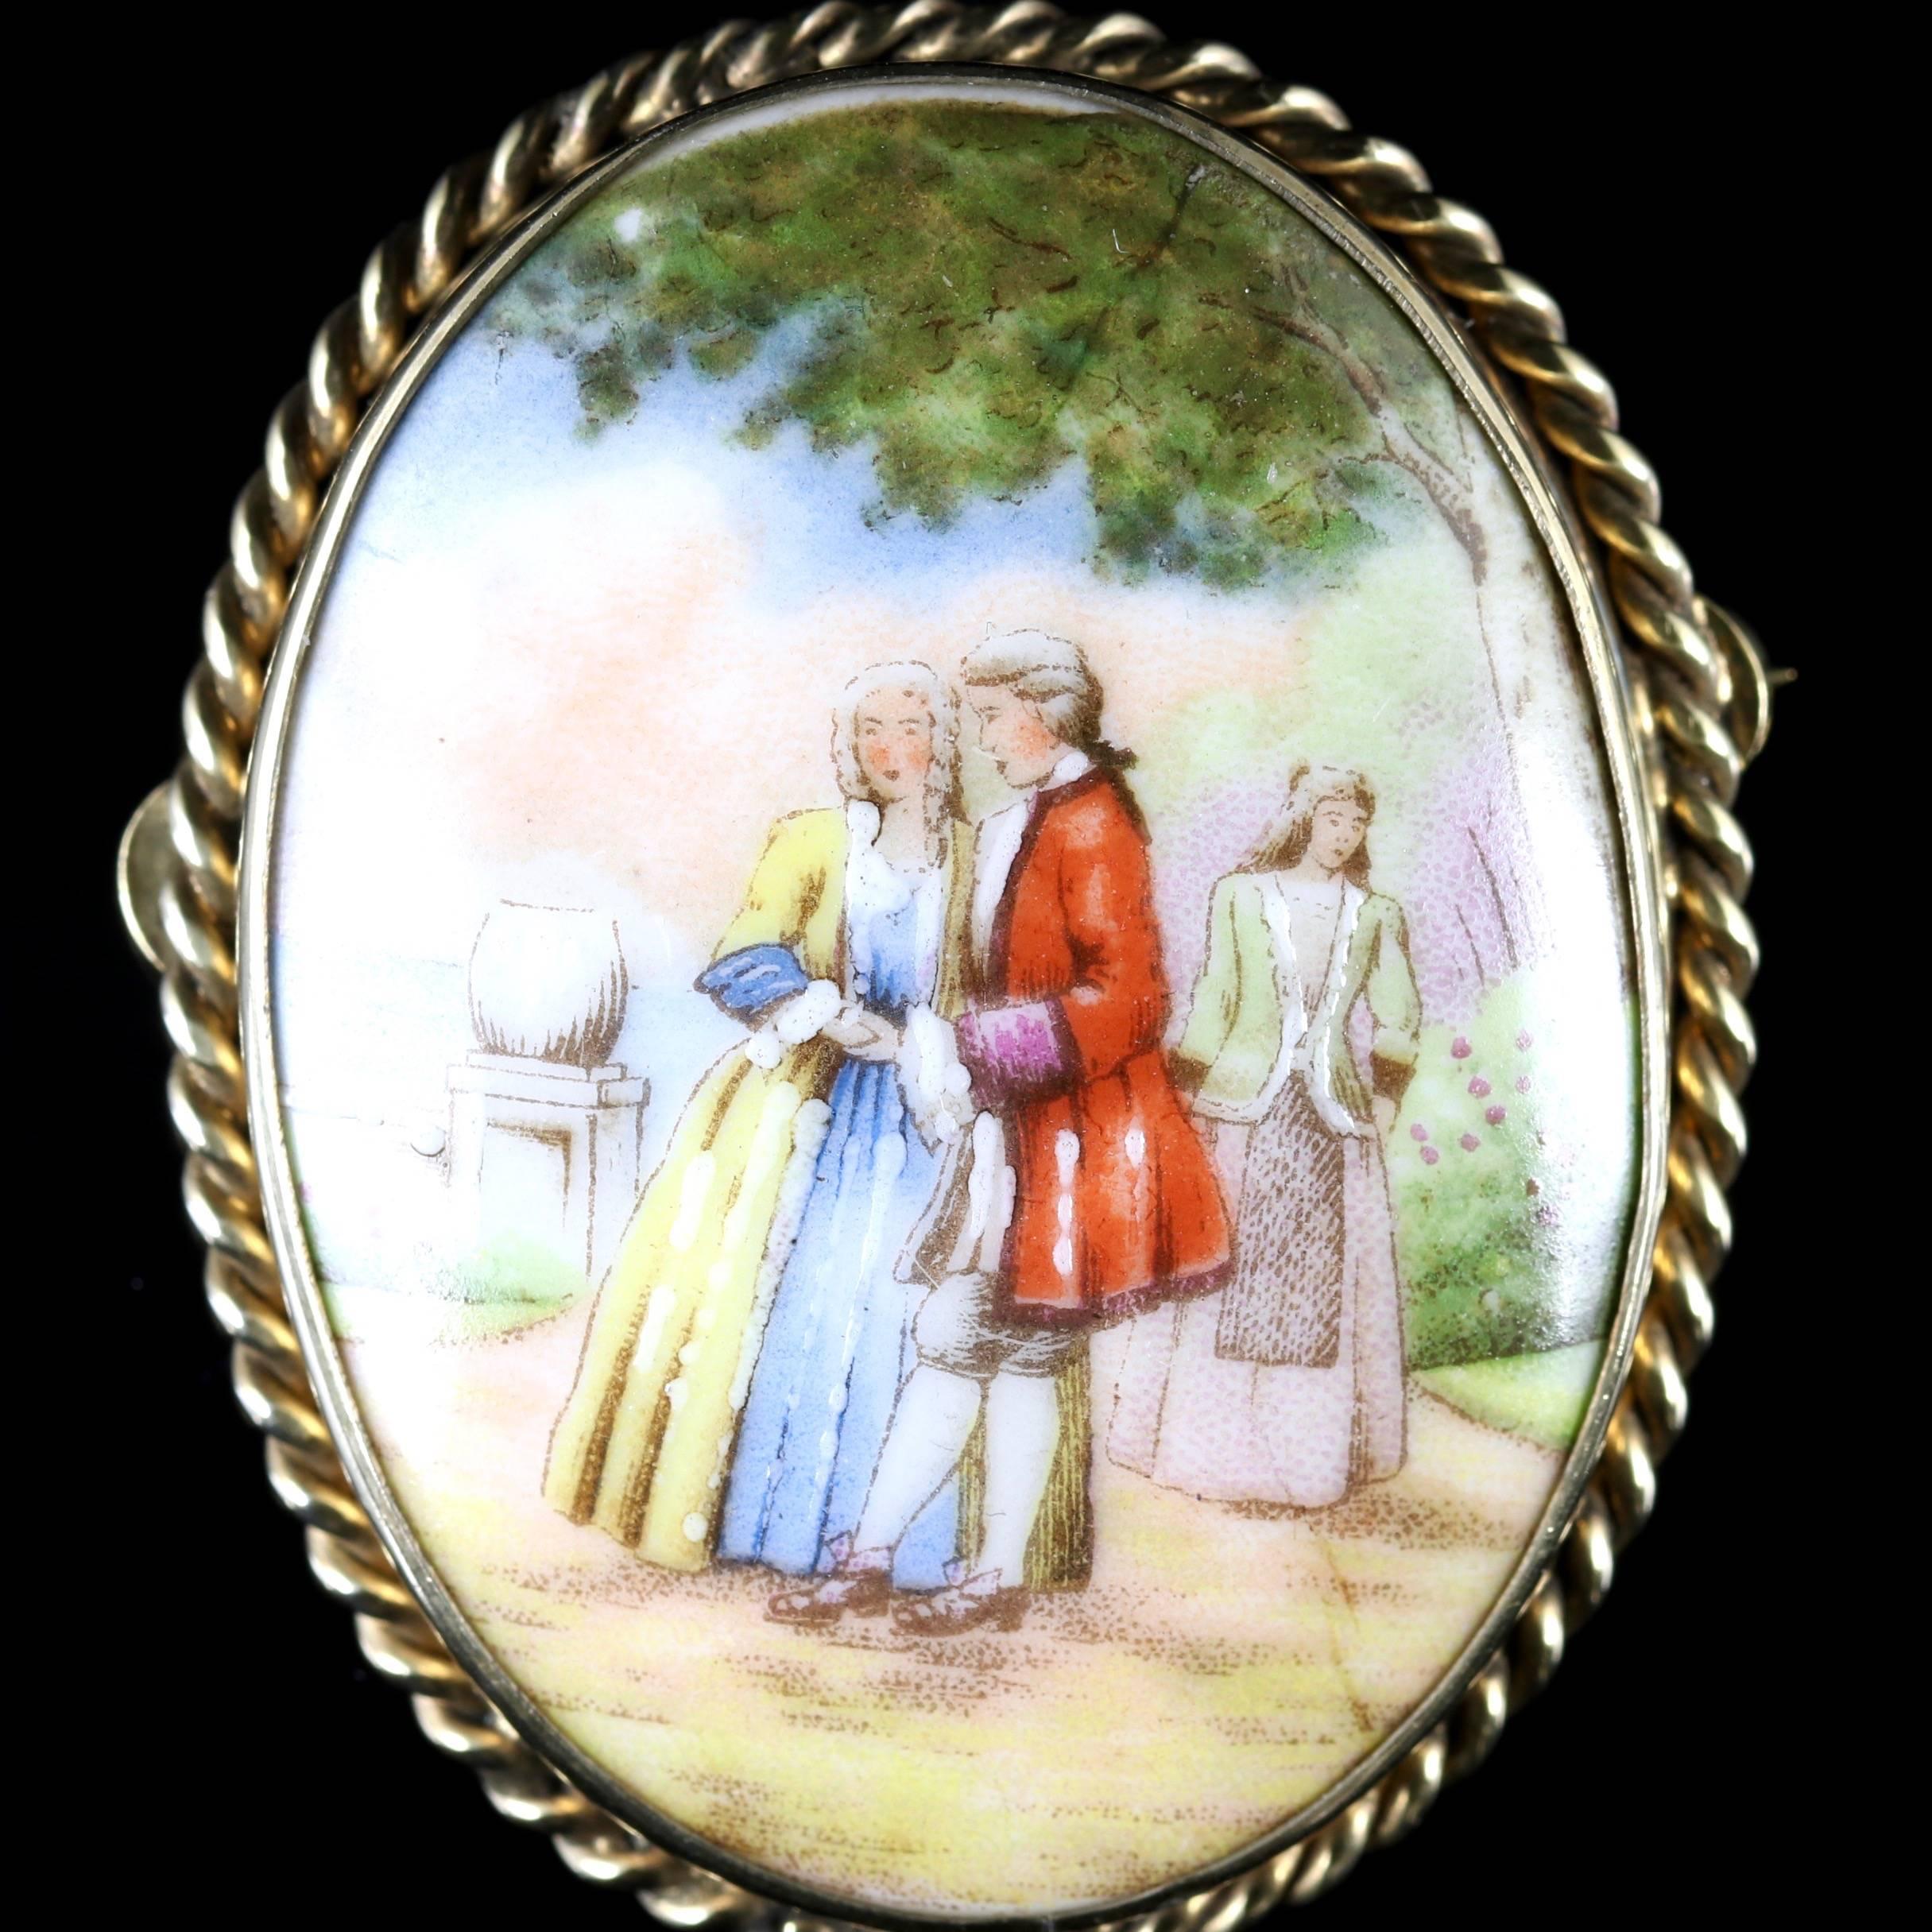 This fabulous Victorian French Limoges brooch is Circa 1900.

The brooch is hand painted and set in 18ct Yellow Gold on Silver.

It has a lovely rope-edge finish all round the brooch.

Hallmarked Limoges France.

Limoges is a city in